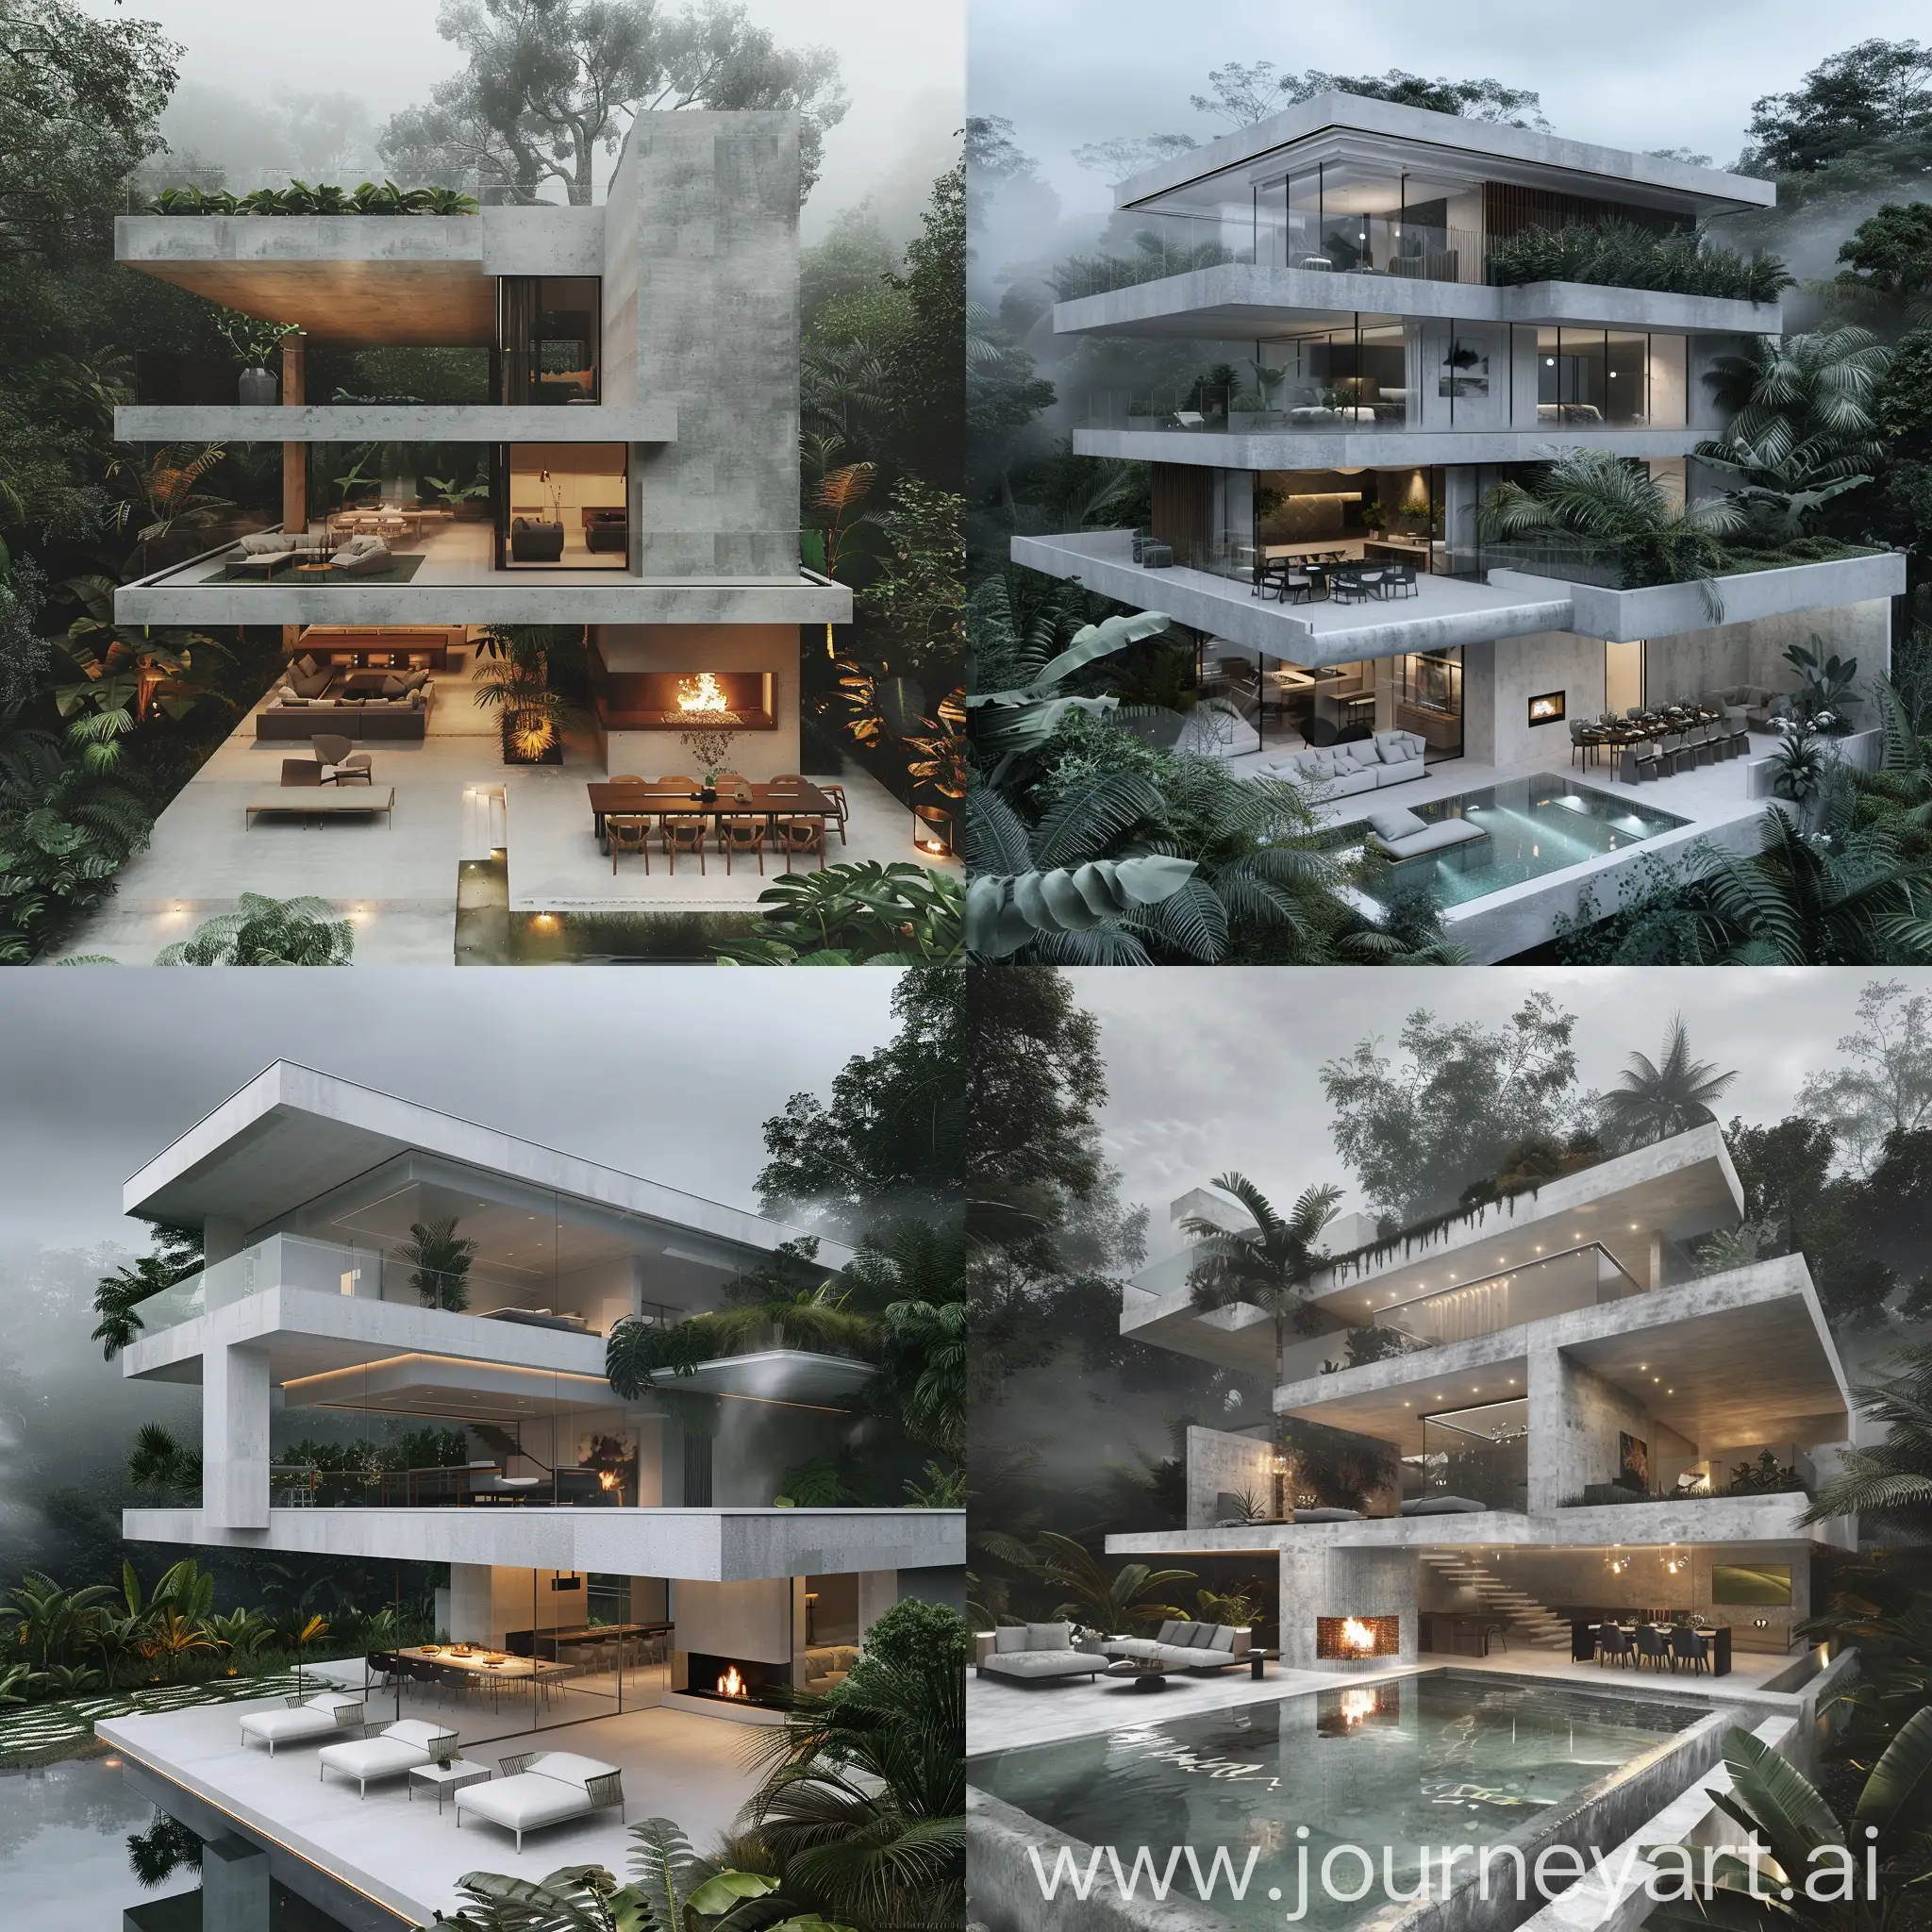 A modern three-story villa with white and gray colors and concrete, with full arrangement of furniture.
 with an infinity glass pool, decorated and soft lighting, fireplace and table and chairs, landscaped yard,
 In a lush tropical forest with broad leaves, foggy cloudy weather, real photo.